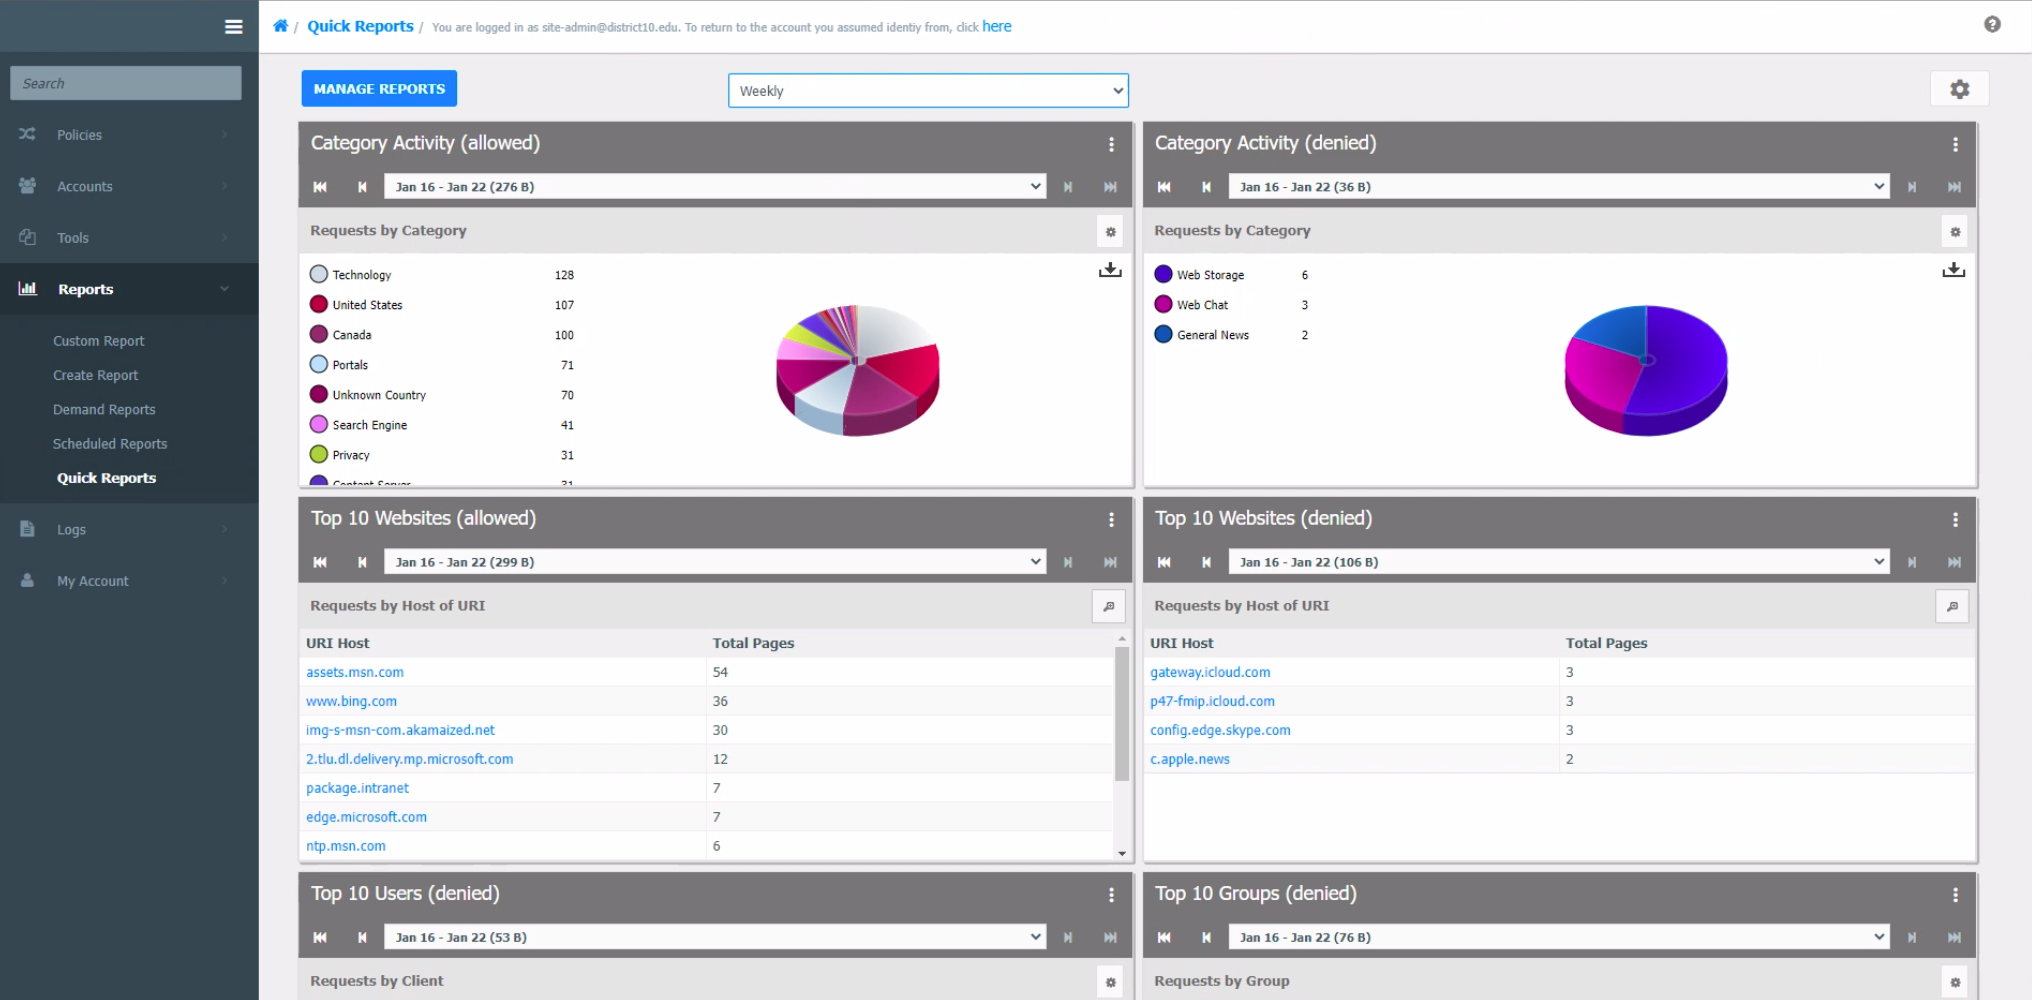 Documentation is easy with customizable logging, reporting, and analytics.